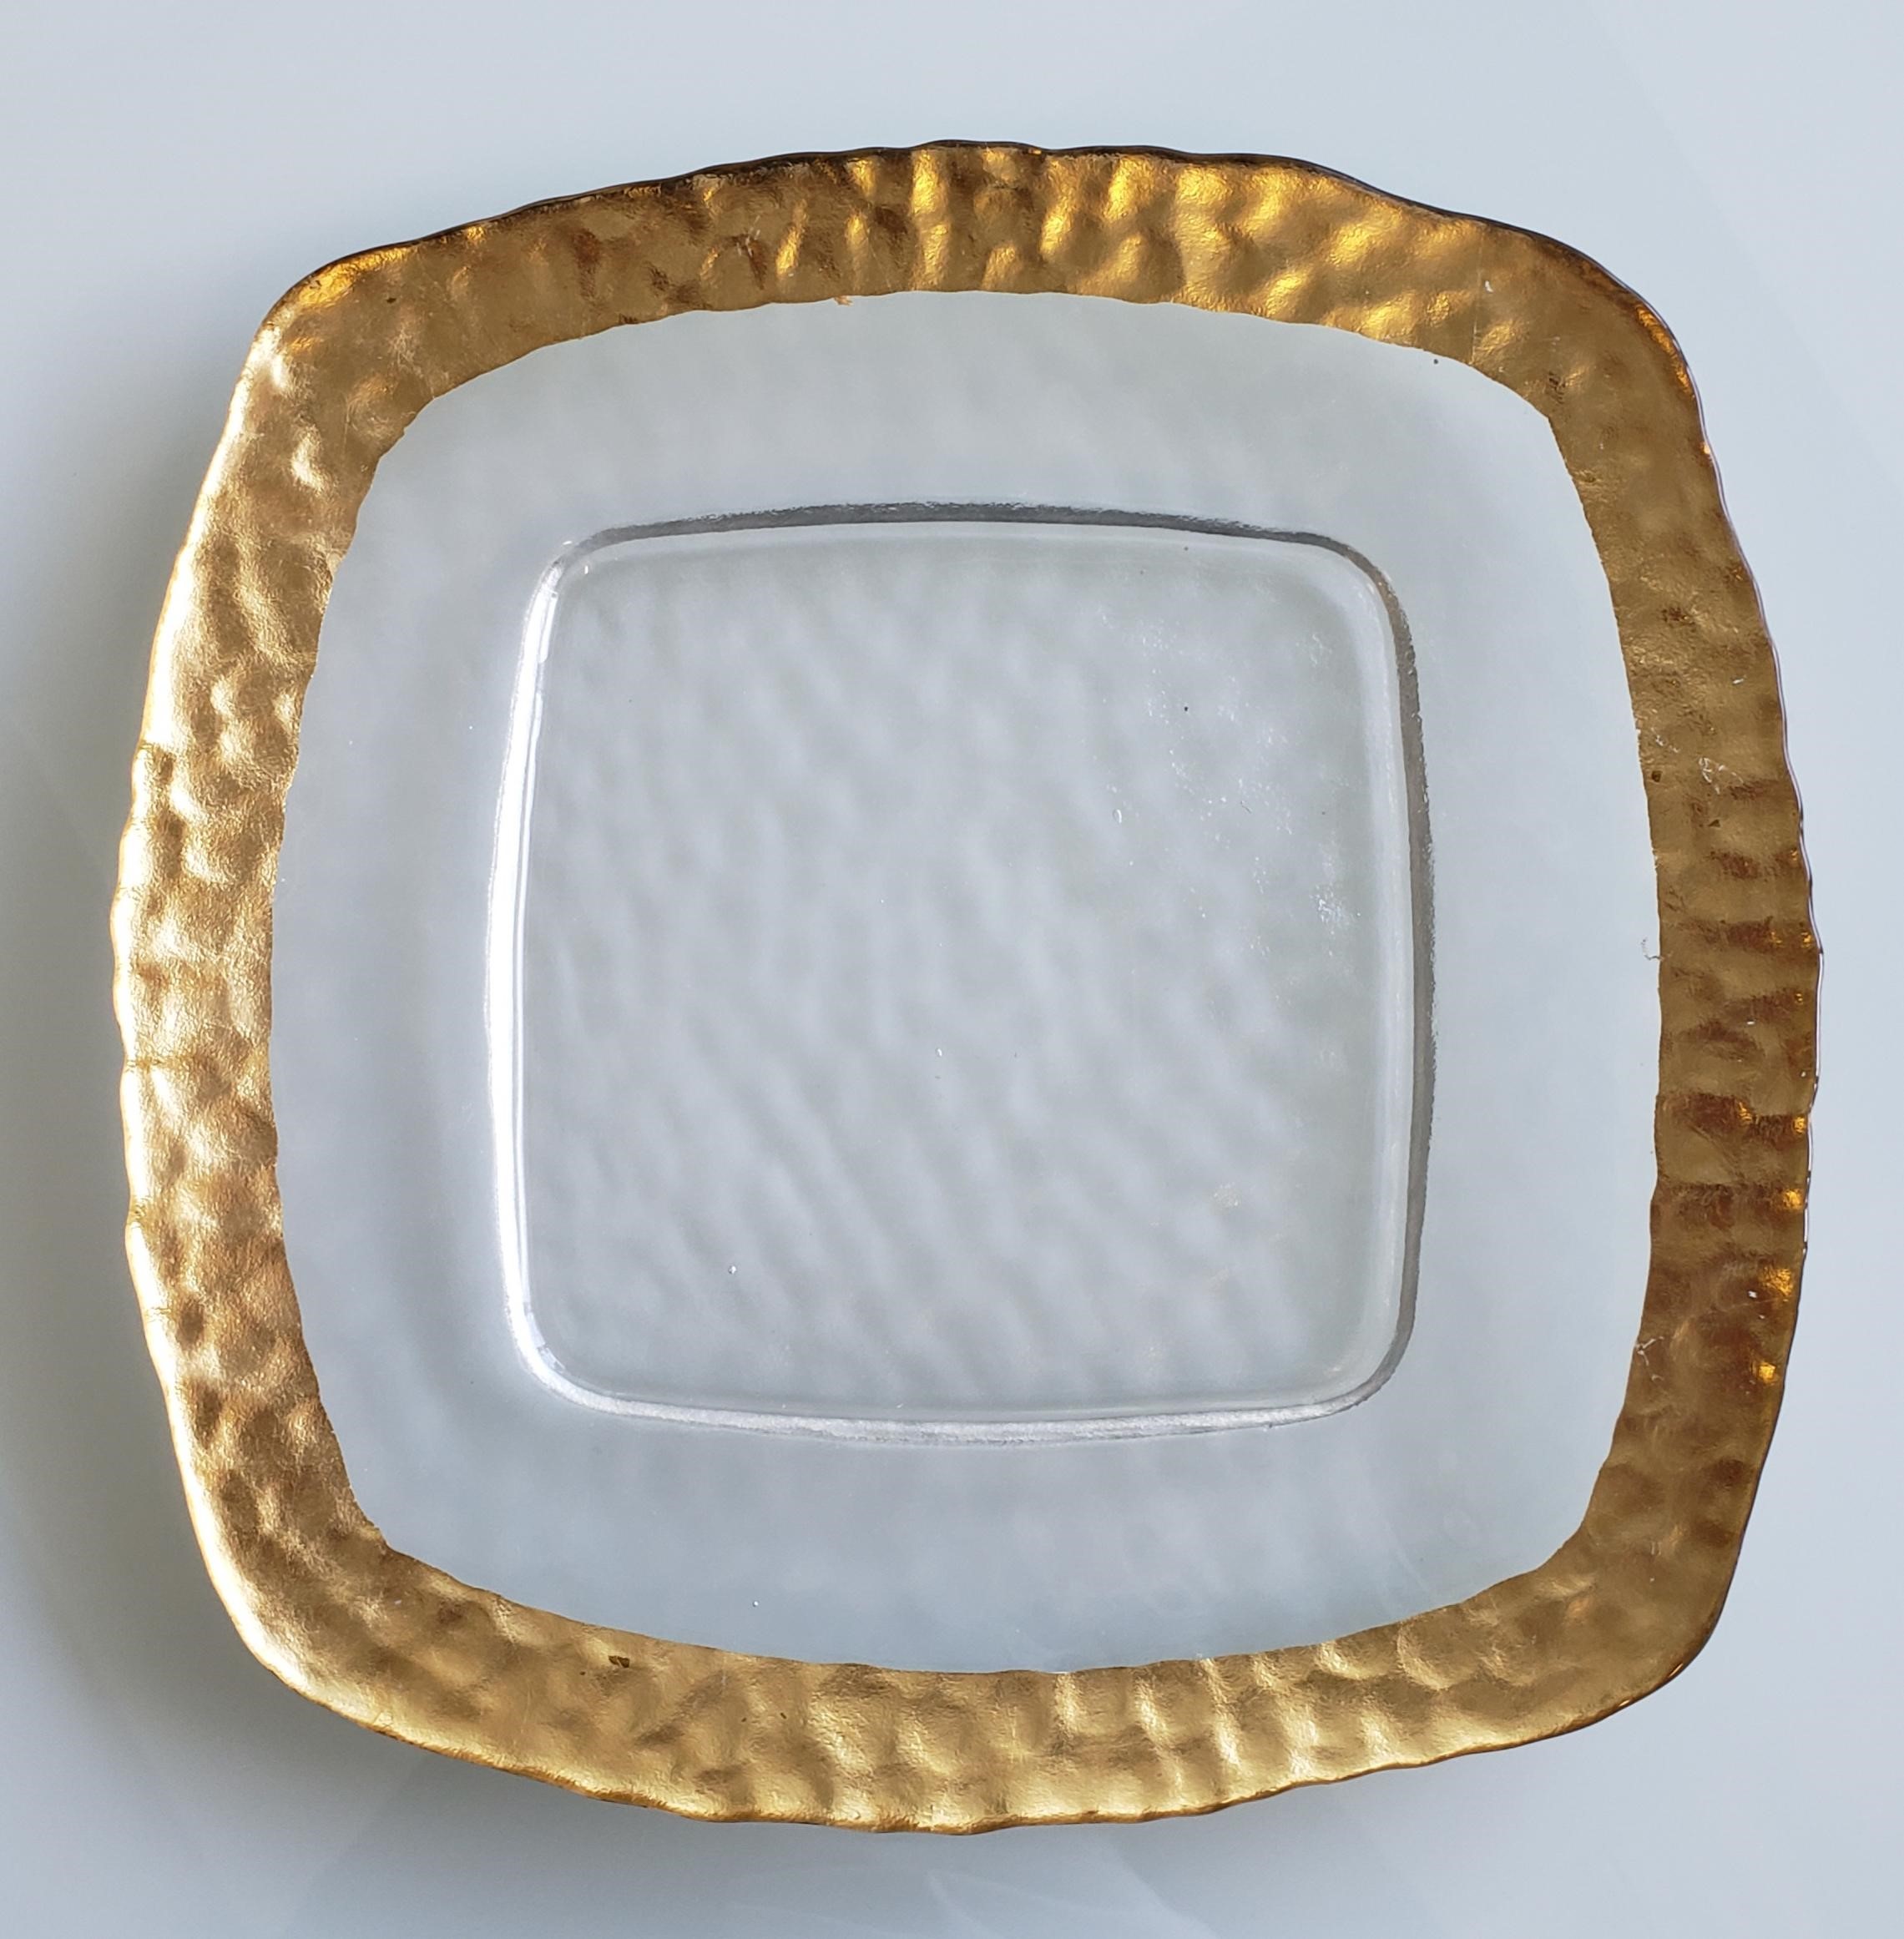 Gold Rim Glass Chargers